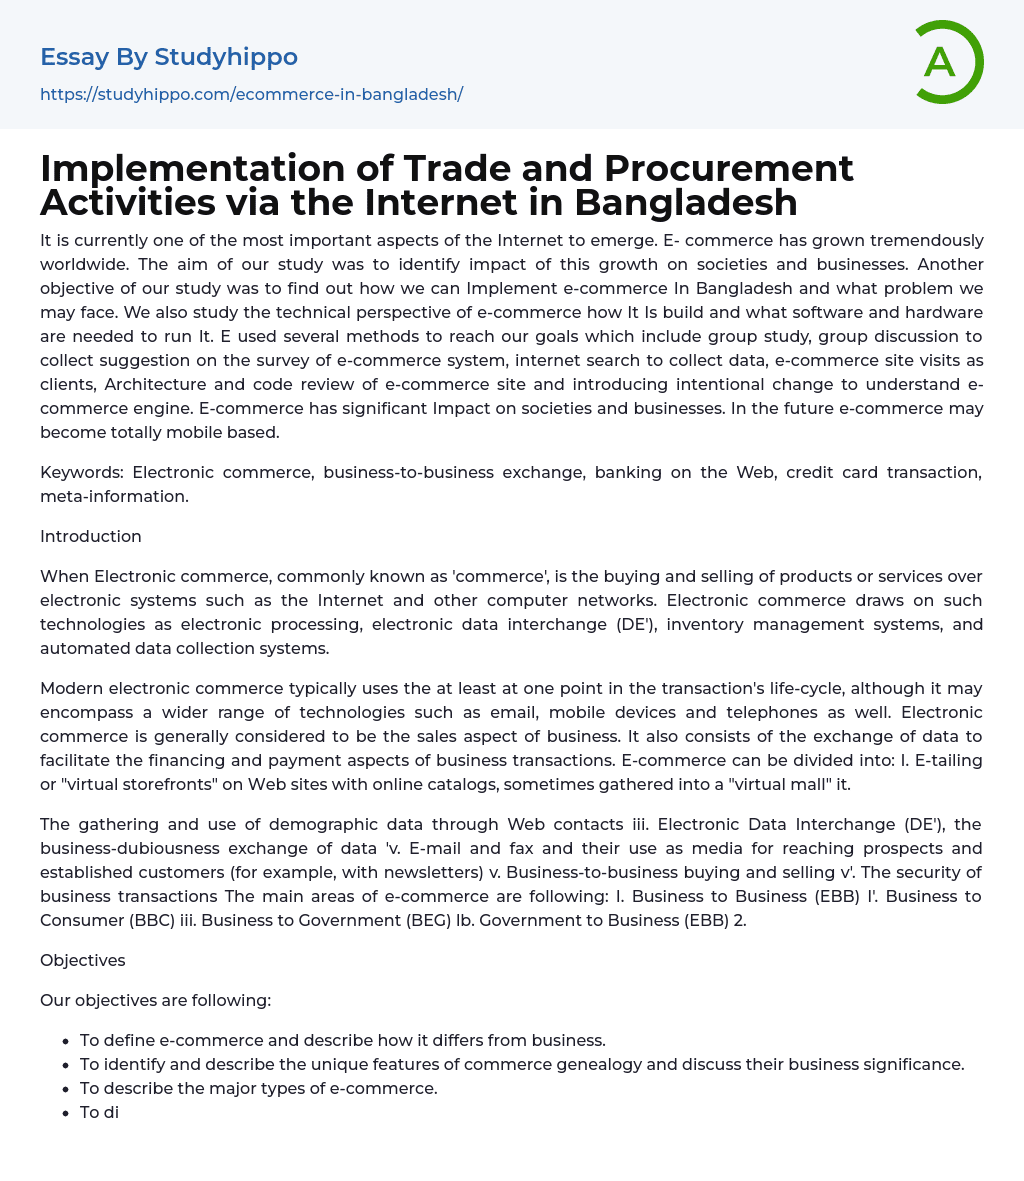 Implementation of Trade and Procurement Activities via the Internet in Bangladesh Essay Example